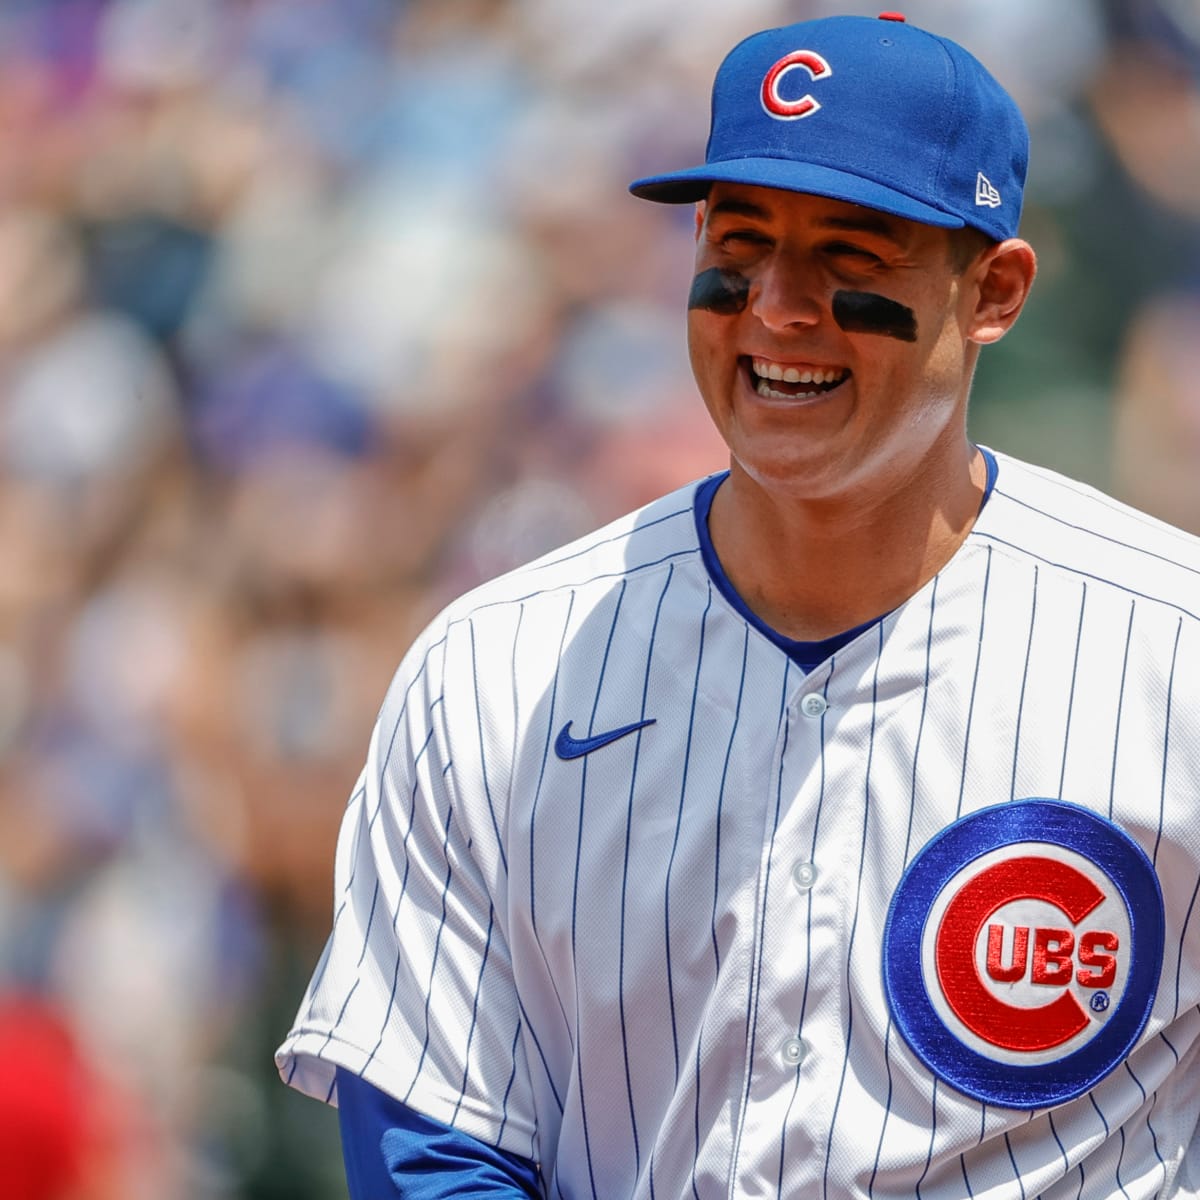 The Yankees needed a little more from Anthony Rizzo in 2021